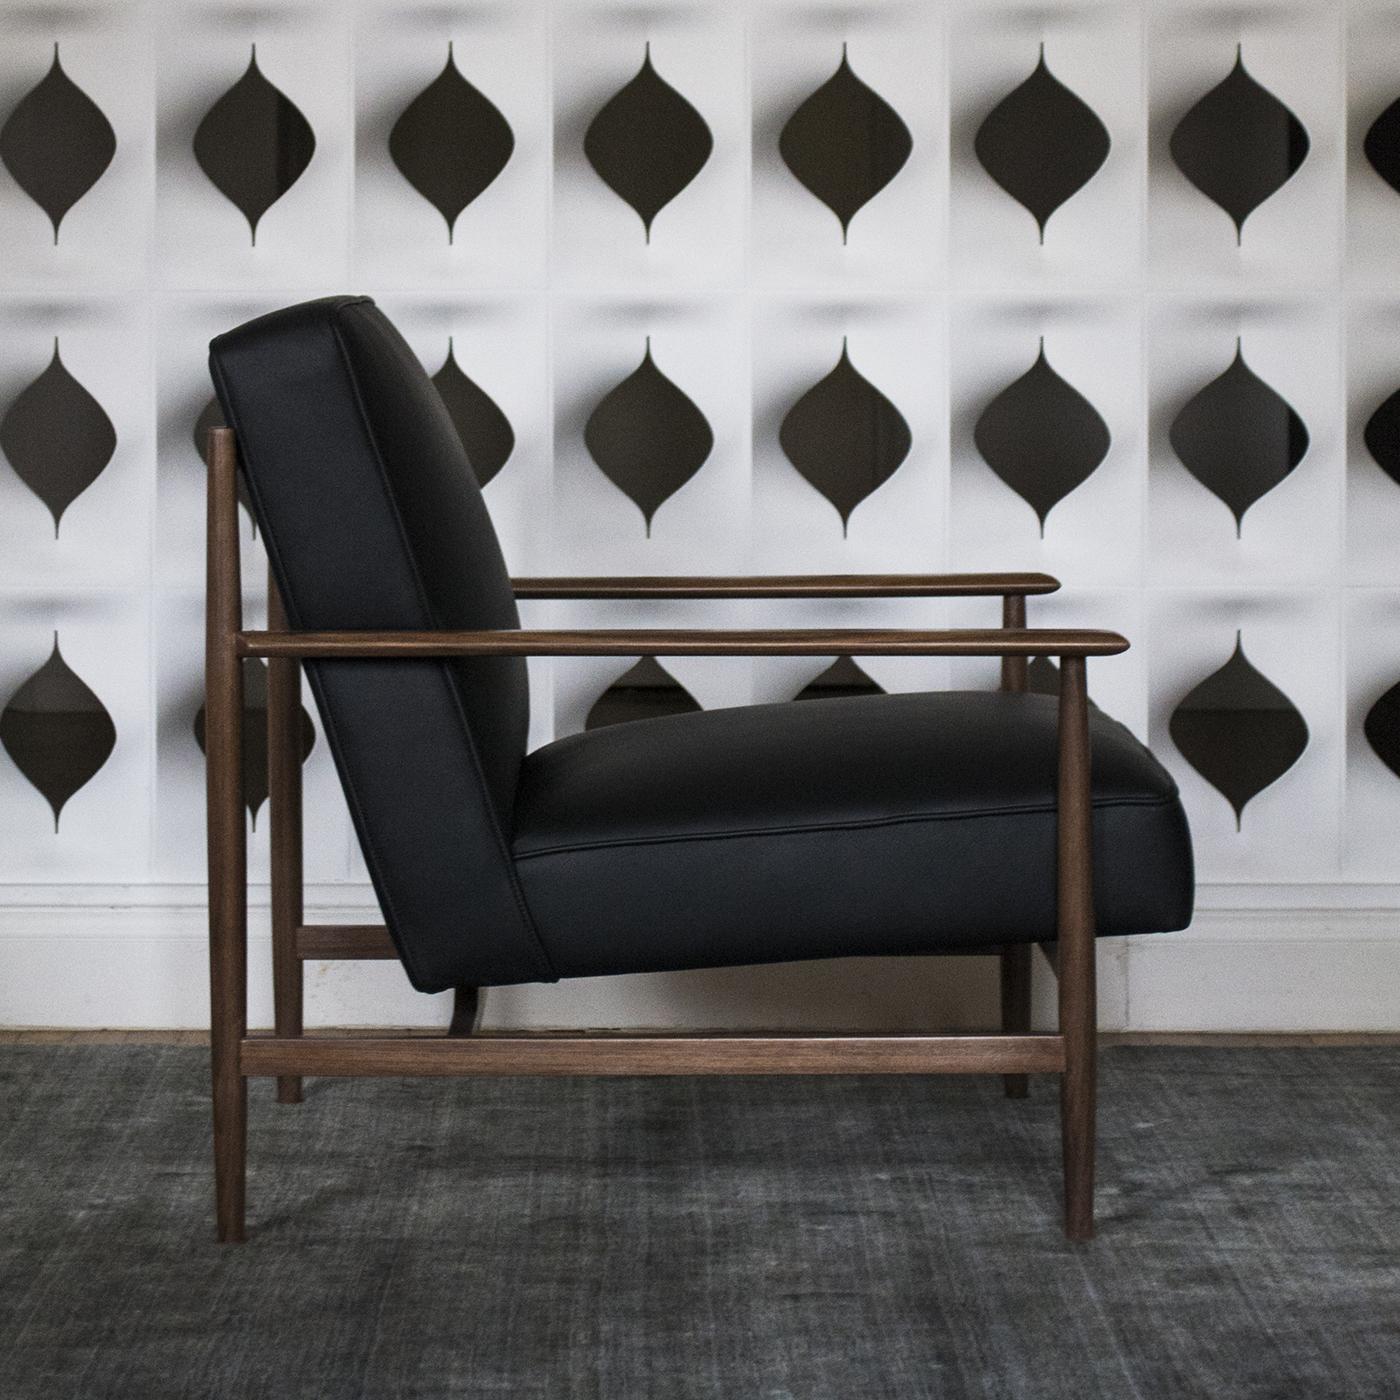 The Gaia Black Leather Armchair is elegant, refined and comfortable, with a unique interlocking structure made from walnut by the finest Italian craftsmen.\nEach piece is unique thanks to the different tones and grain of the wood and the seat is